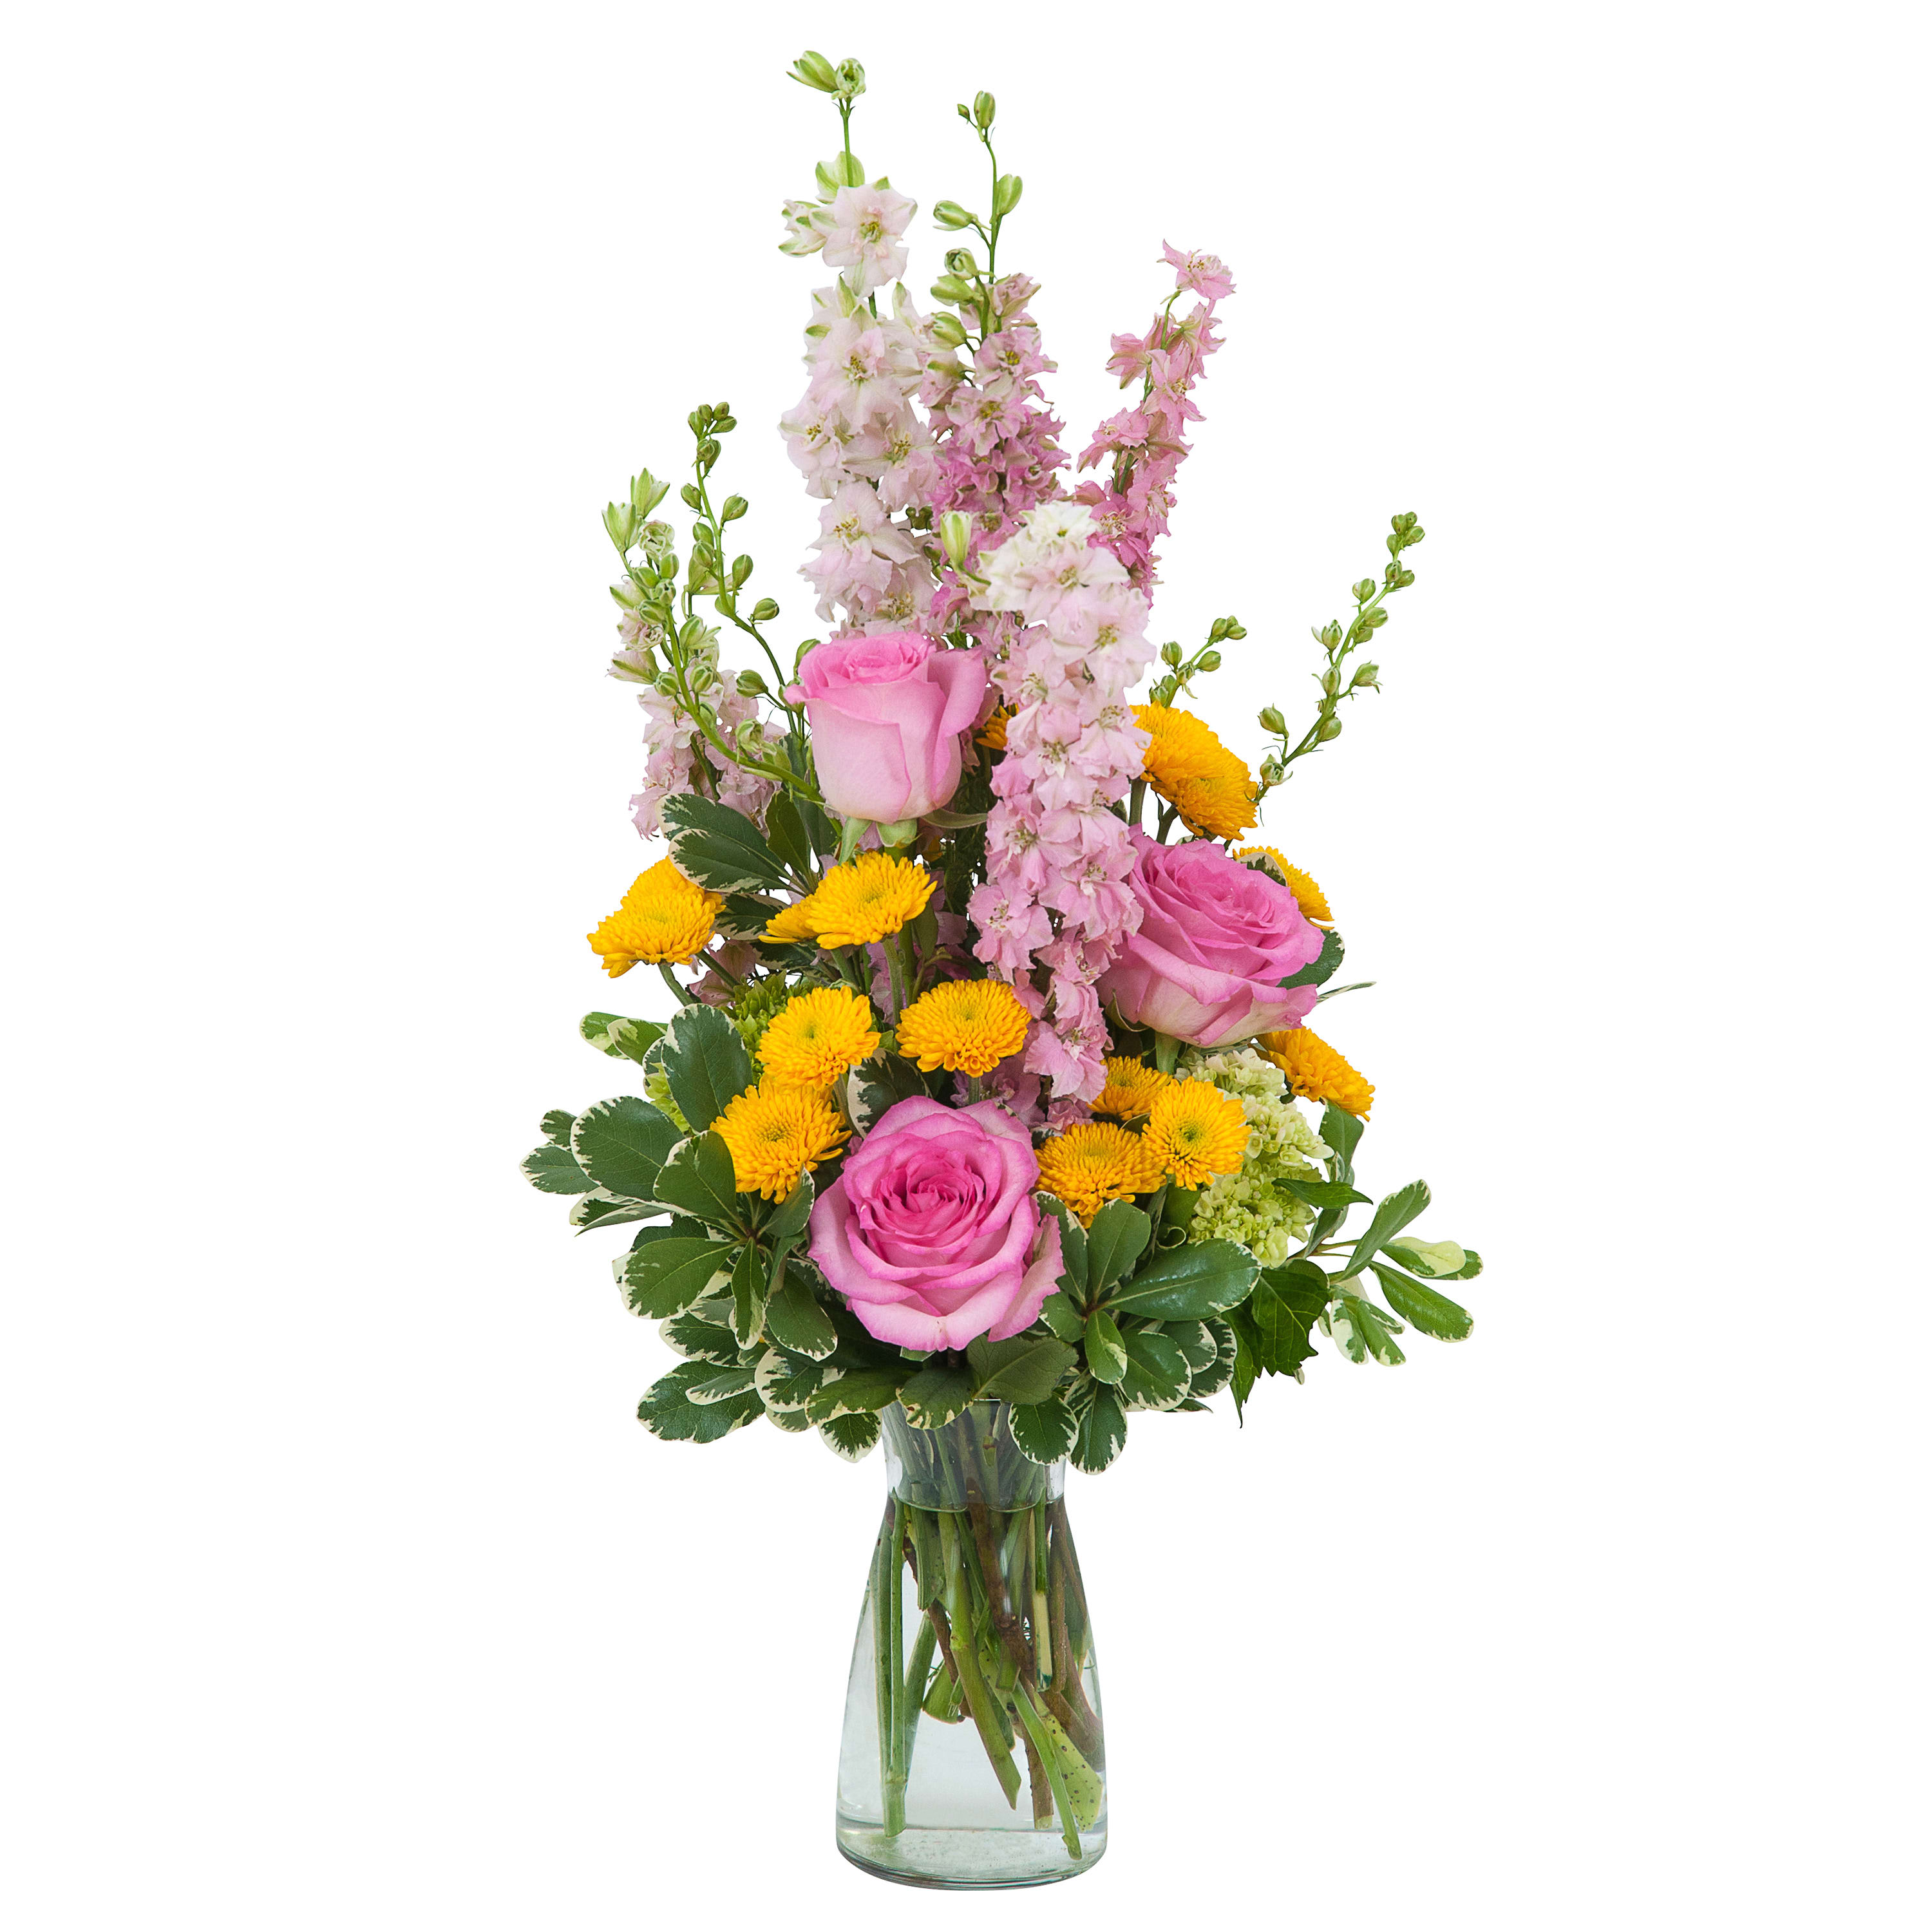 Pink N More - A garden style arrangement arranged in a beautiful clear glass vase to brighten someone’s day.TMF-607